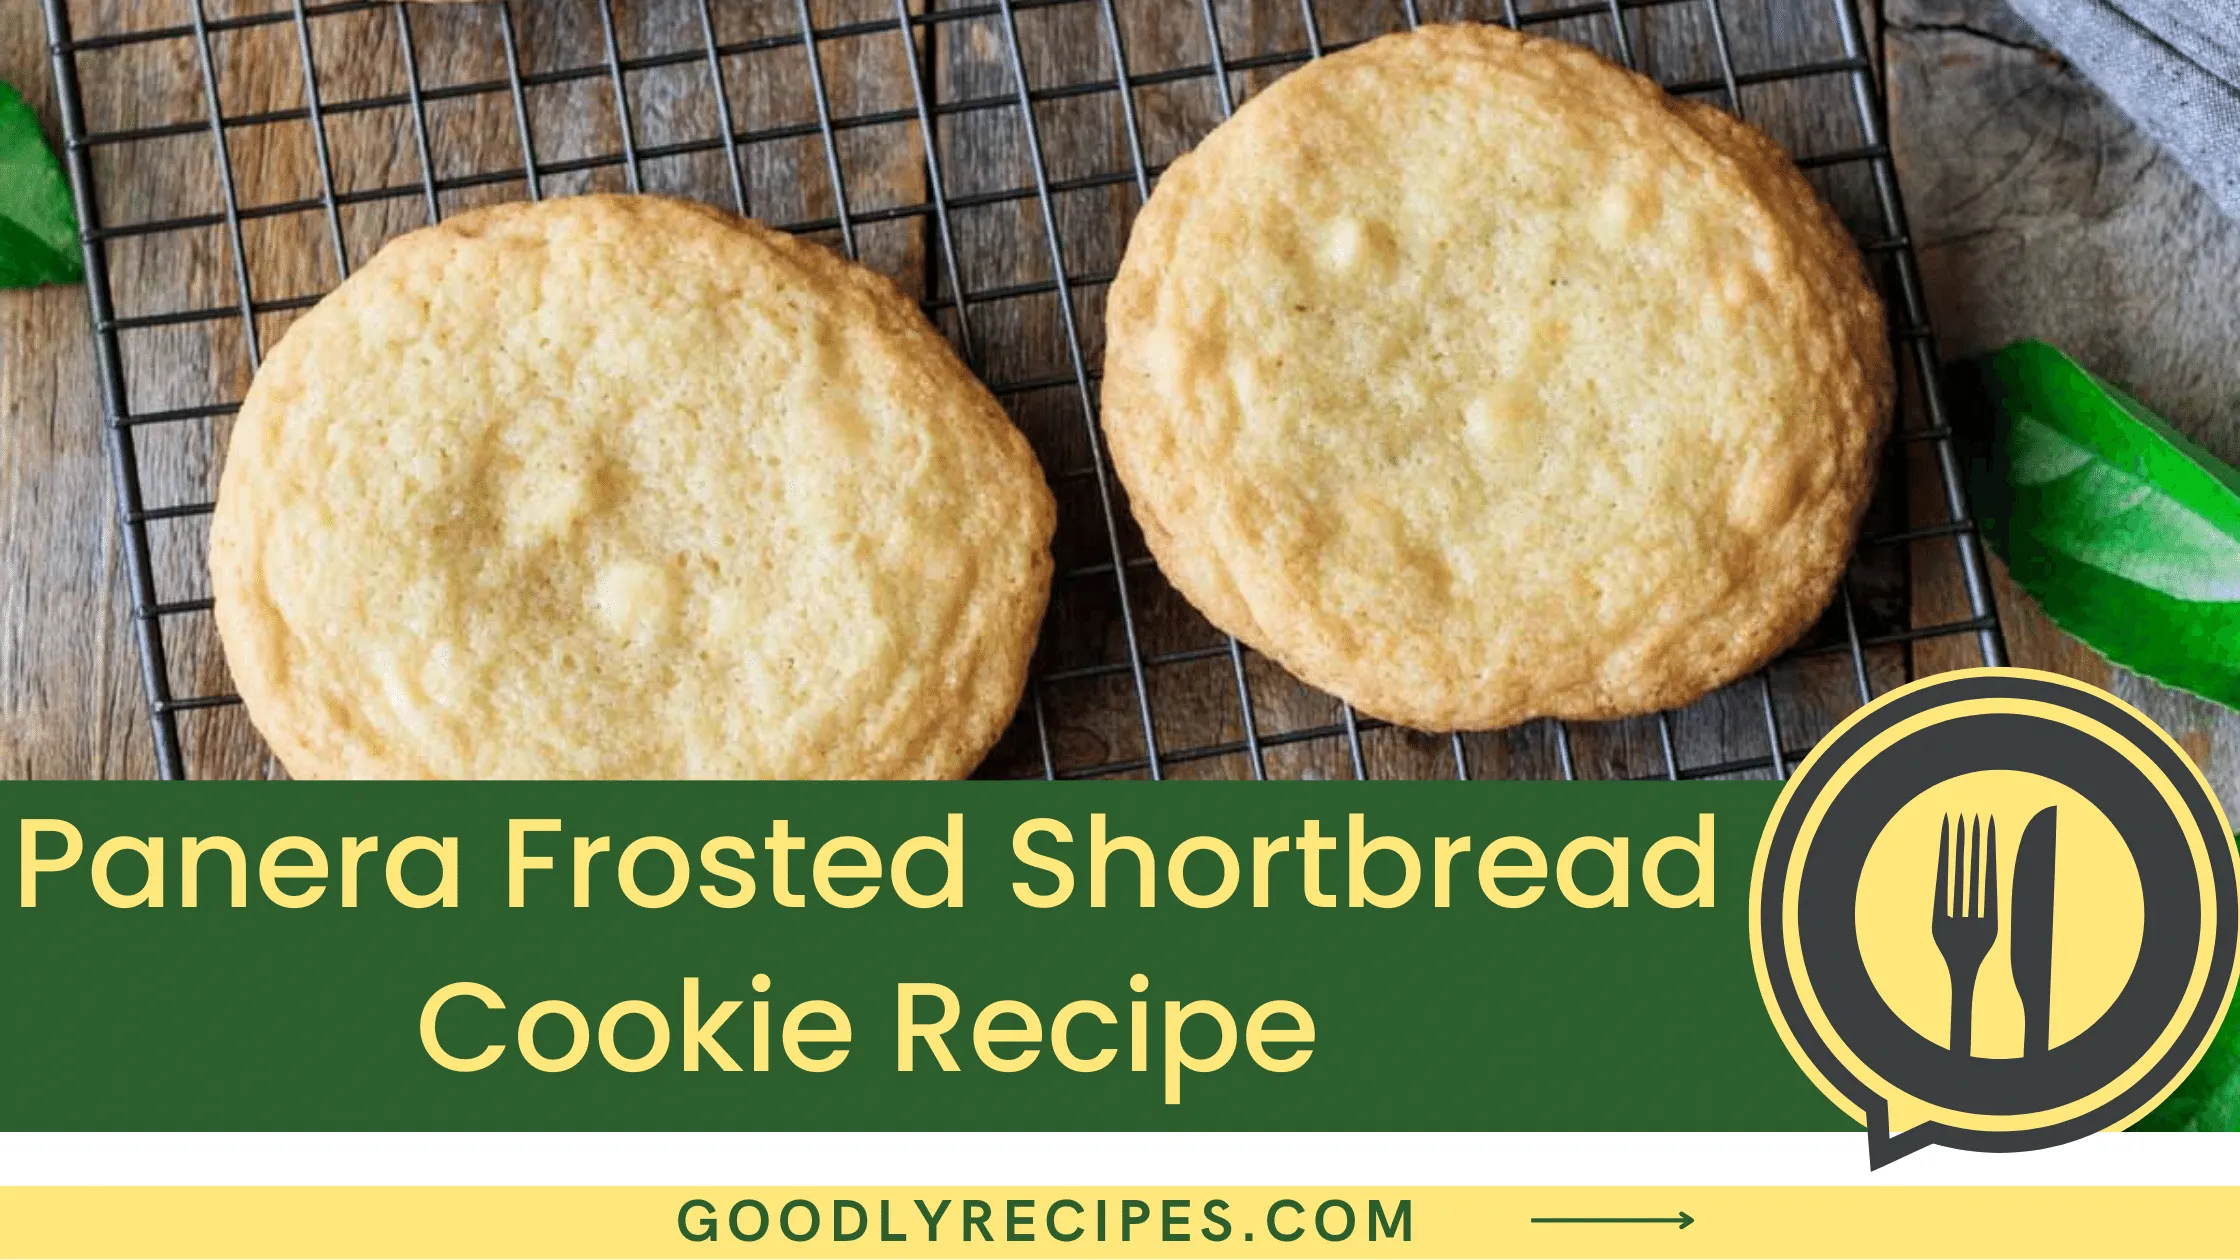 What Is Panera Frosted Shortbread Cookie?